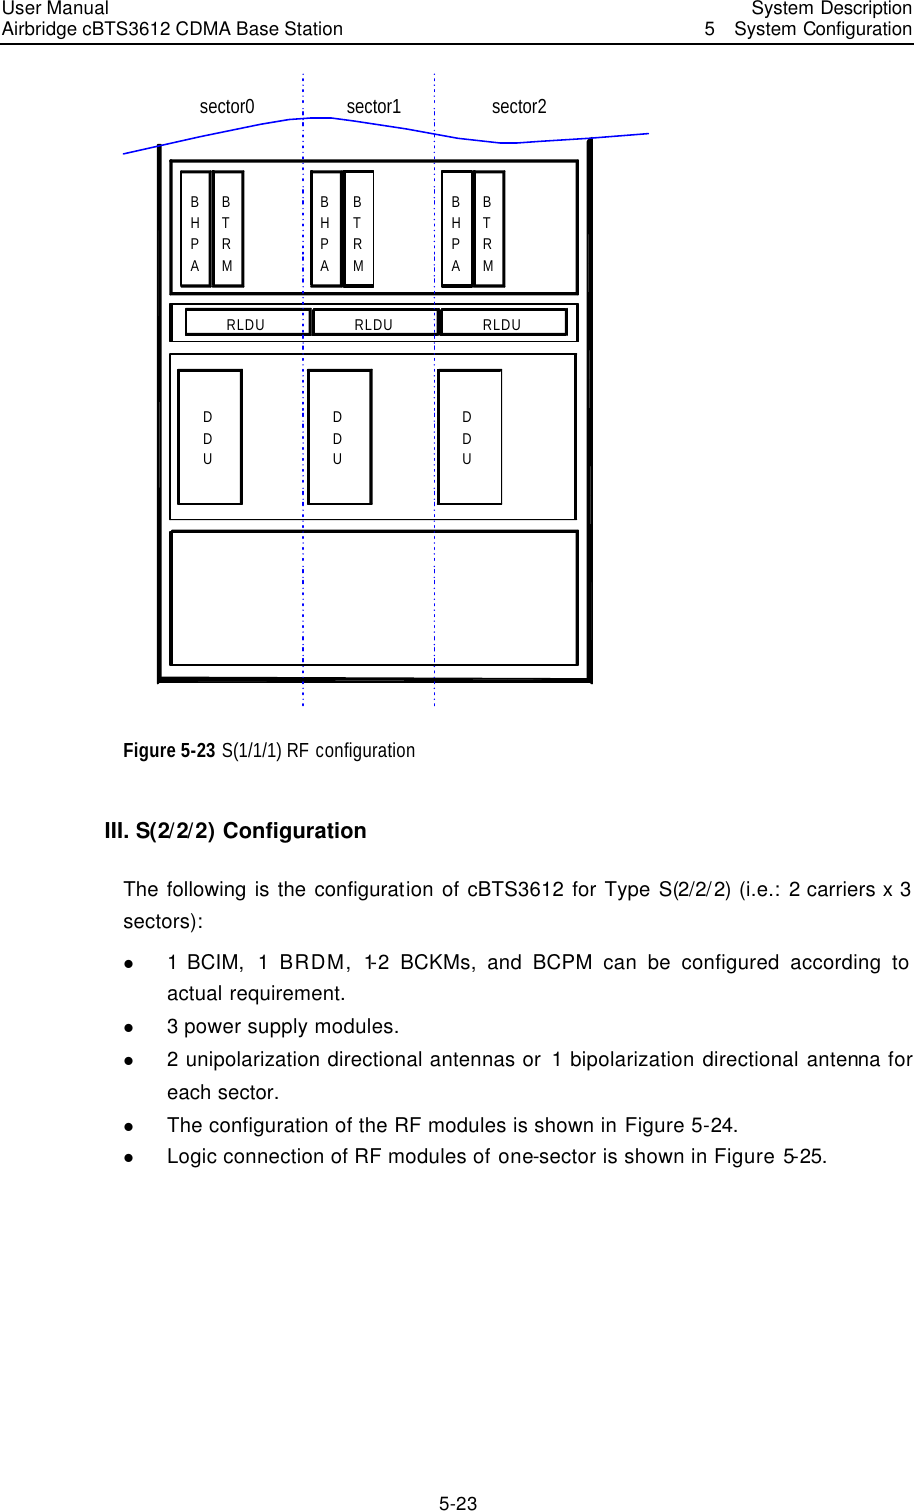 User Manual Airbridge cBTS3612 CDMA Base Station   System Description5  System Configuration 5-23 DDUBHPABTRMRLDUDDUDDUBHPABTRMBHPABTRMRLDU RLDUsector0 sector2sector1 Figure 5-23 S(1/1/1) RF configuration III. S(2/2/2) Configuration The following is the configuration of cBTS3612 for Type S(2/2/2) (i.e.: 2 carriers x 3 sectors):   l 1 BCIM,  1 BRDM, 1-2 BCKMs, and BCPM can be configured according to actual requirement.   l 3 power supply modules.   l 2 unipolarization directional antennas or 1 bipolarization directional antenna for each sector. l The configuration of the RF modules is shown in Figure 5-24. l Logic connection of RF modules of one-sector is shown in Figure 5-25.  